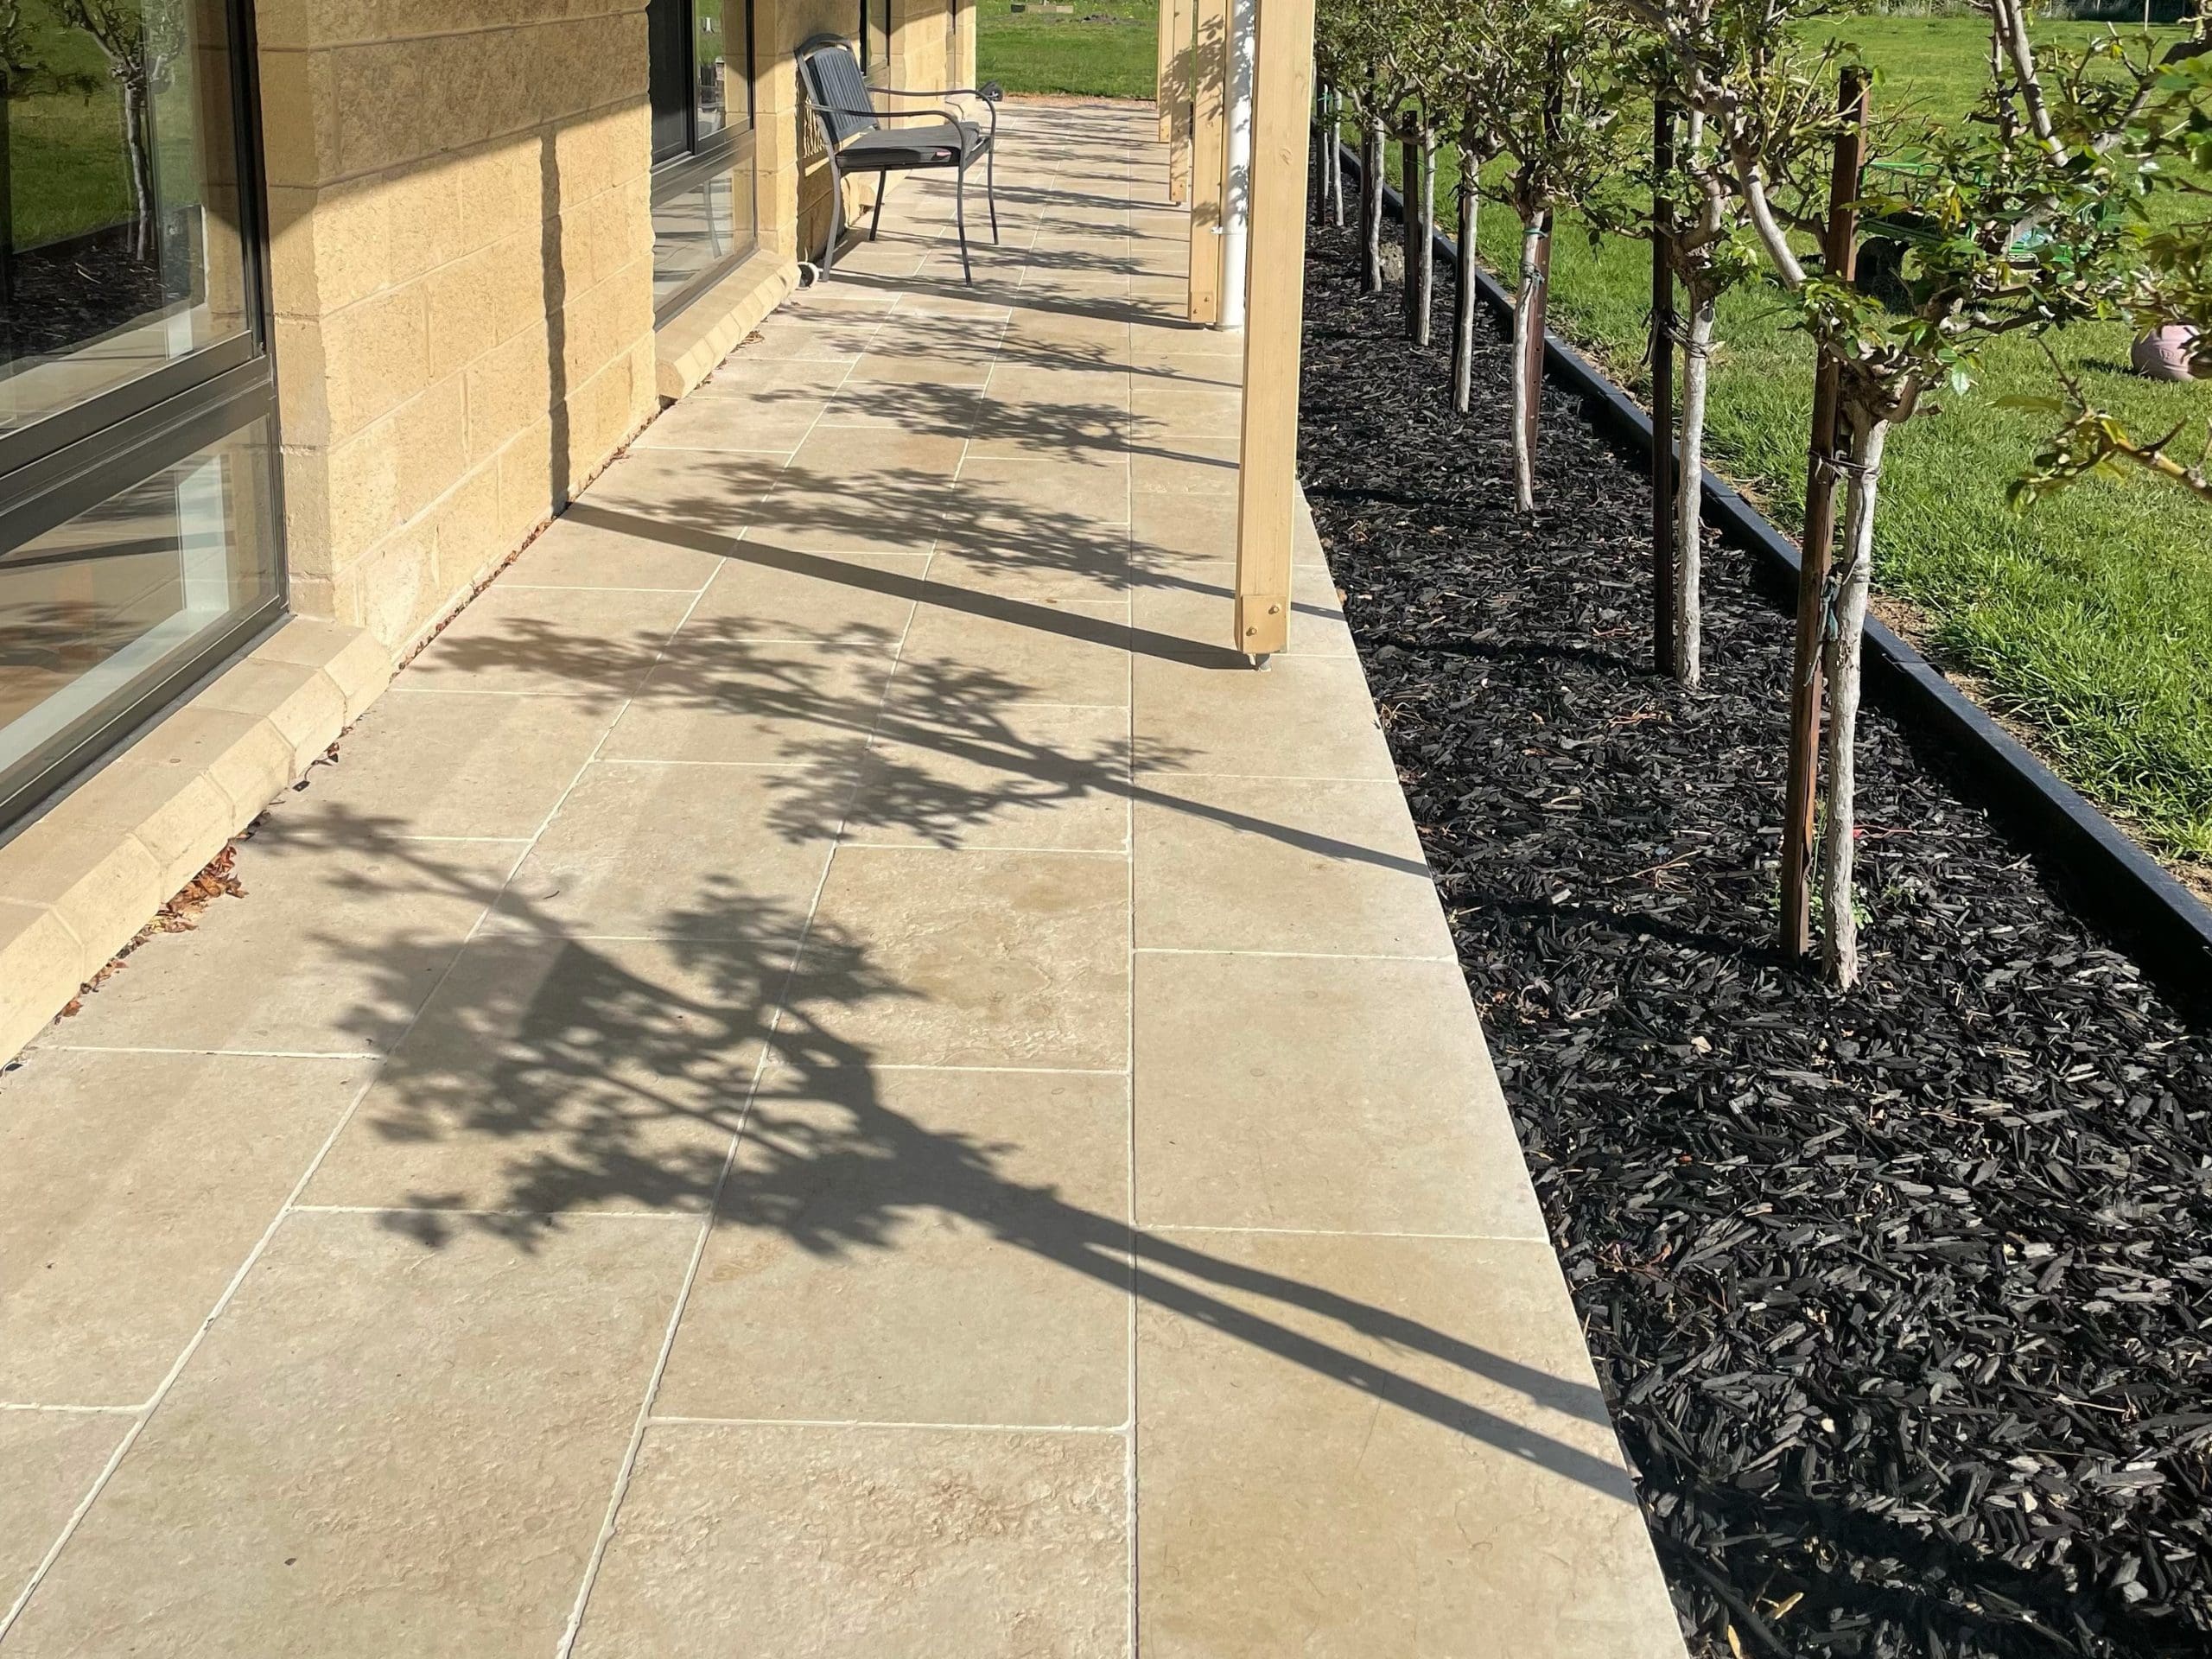 CREMA NOVELDA BRUSHED & TUMBLED LIMESTONE_RMS TRADERS_NATURAL STONE PAVERS POOL COPING INTERNAL TILE SUPPLIER MELBOURNE (7)